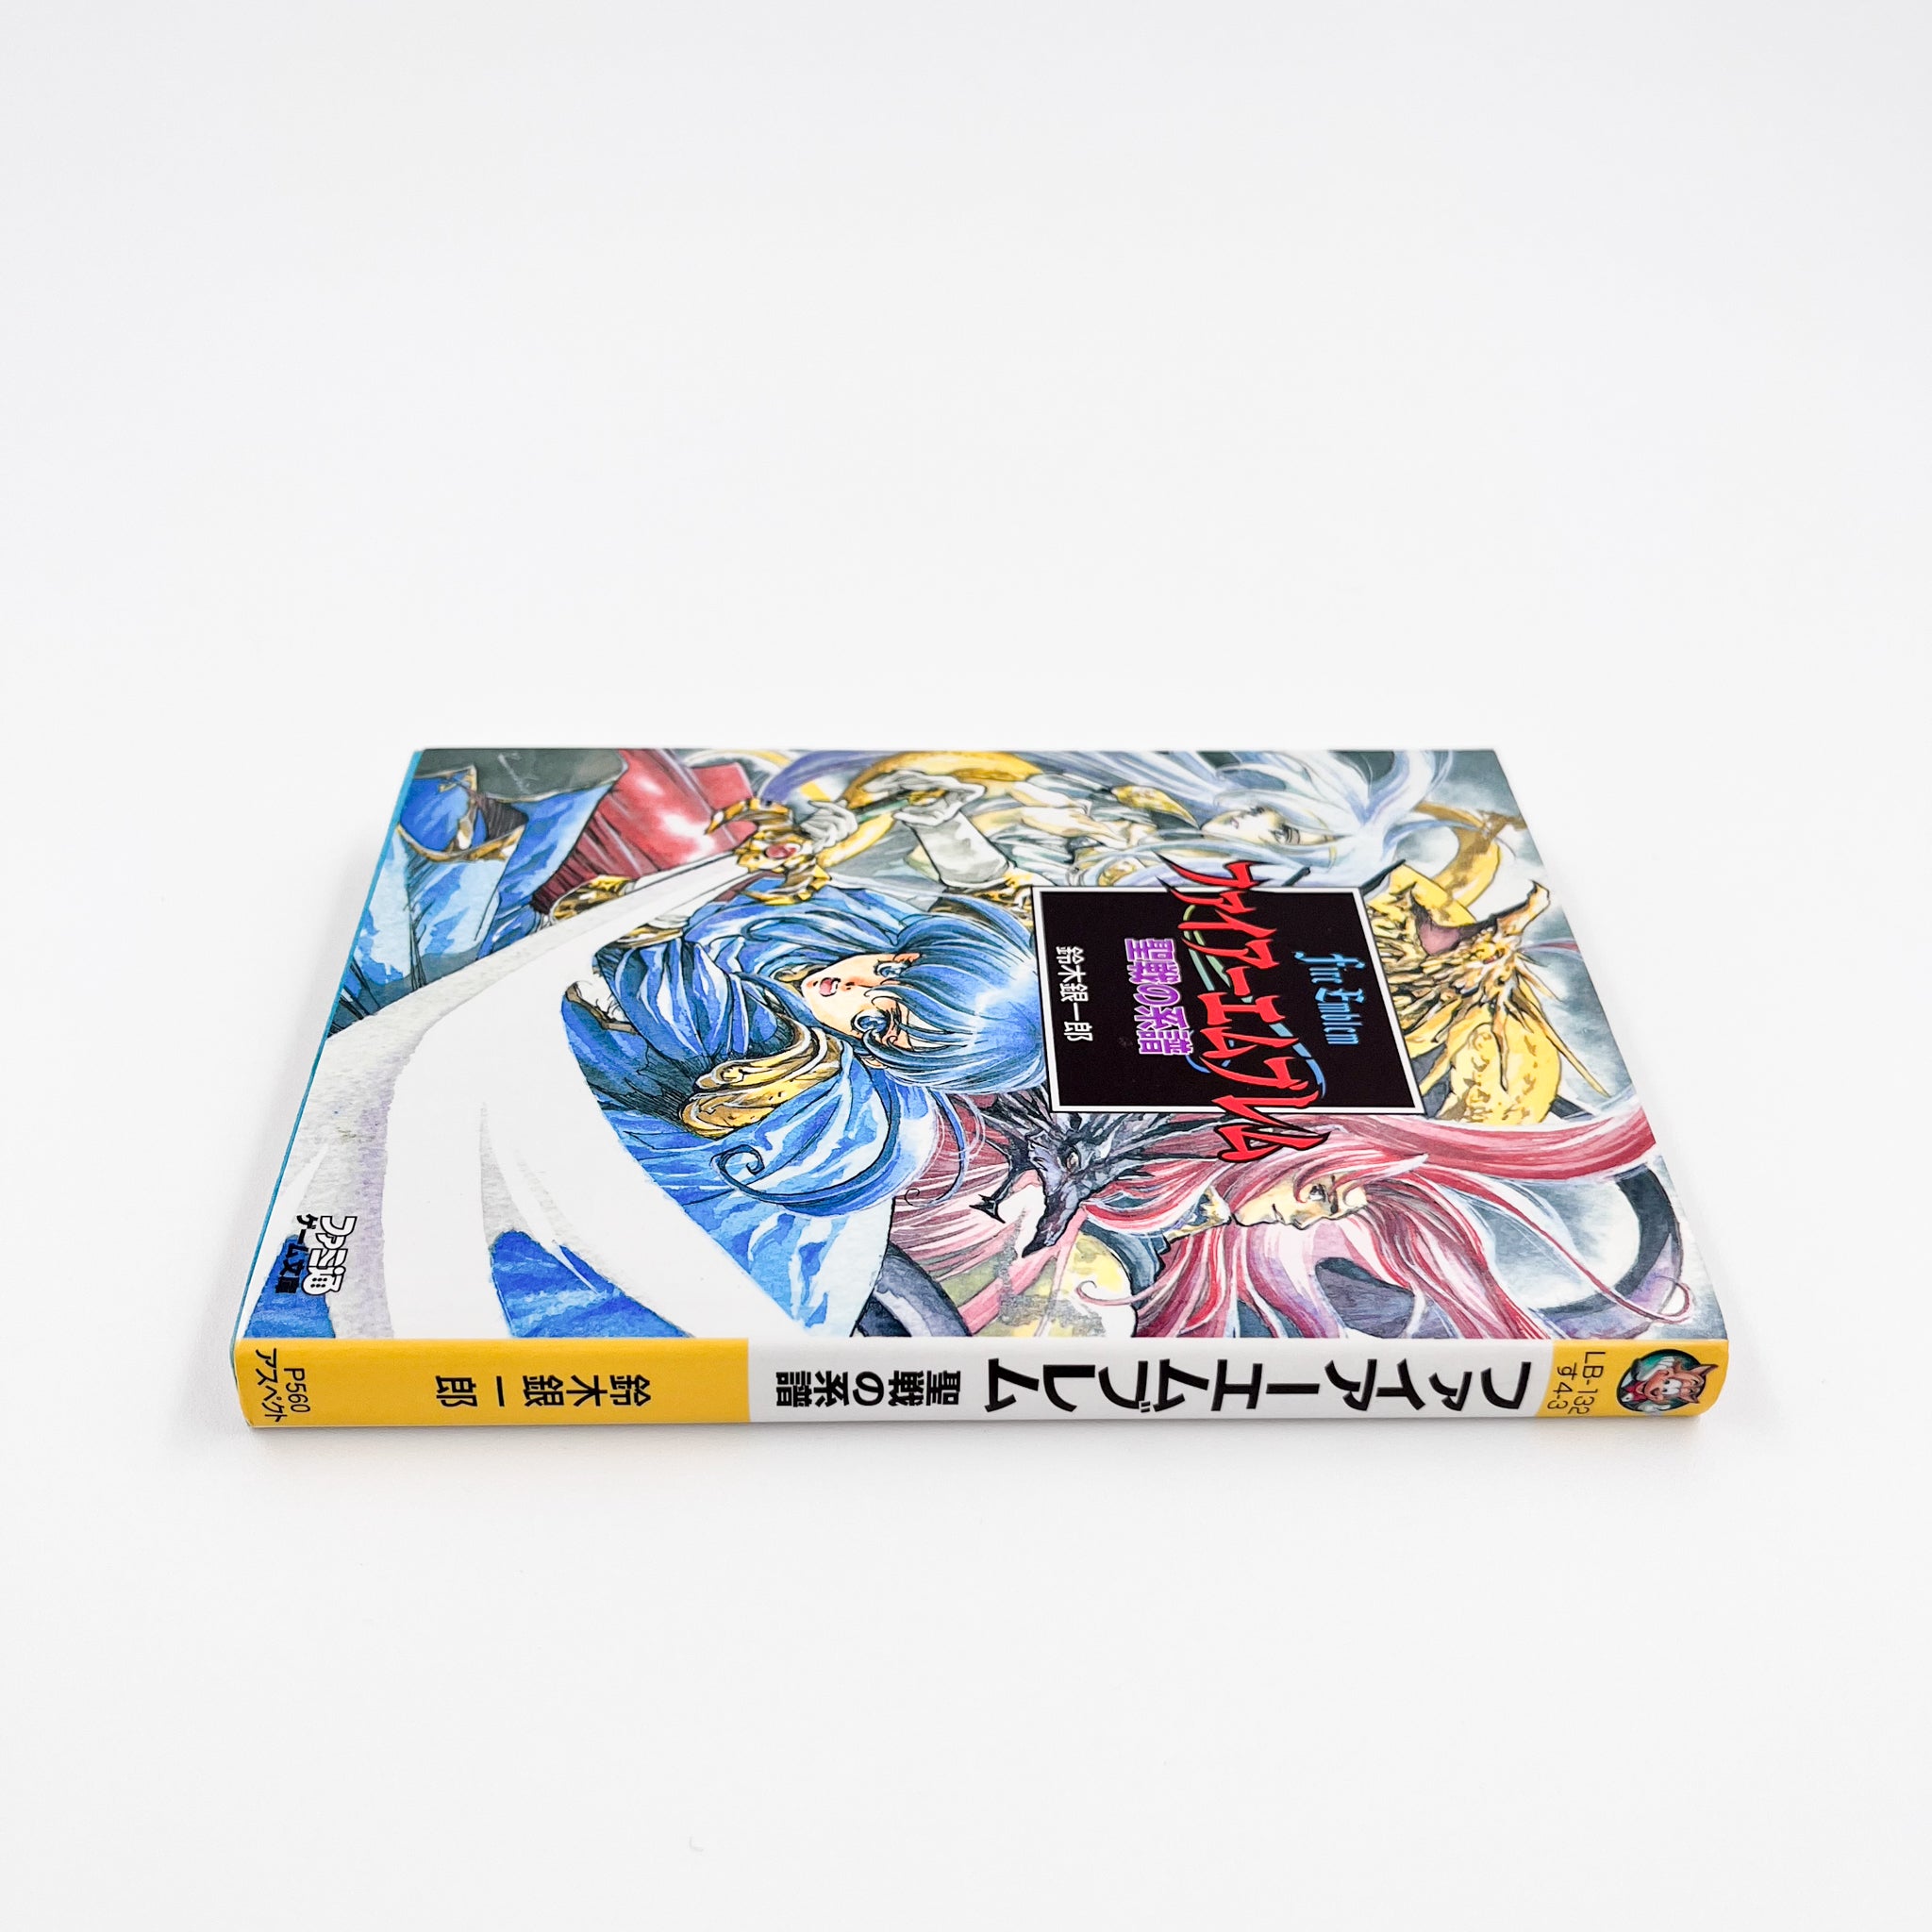 Fire Emblem: Genealogy of the Holy War light novel side view with spine and book title